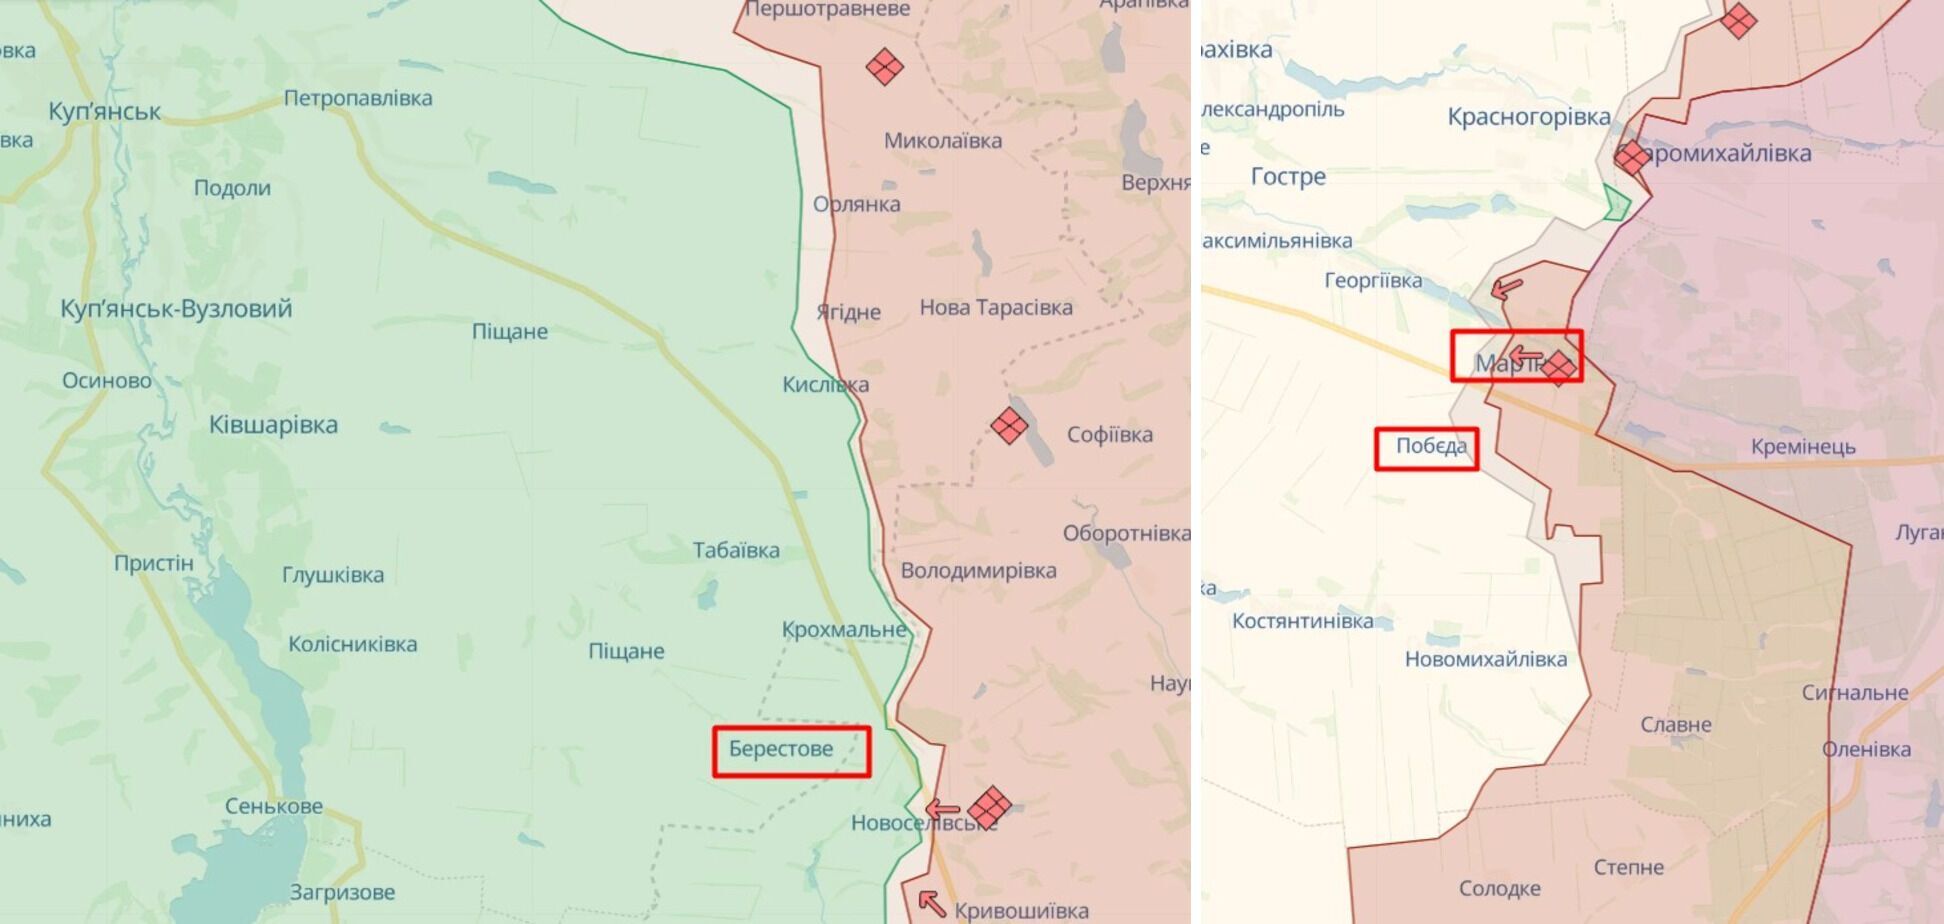 AFU repulsed attacks of occupants in the Kupyansk direction, the enemy is trying to integrate the captured territories into its infosphere - General Staff